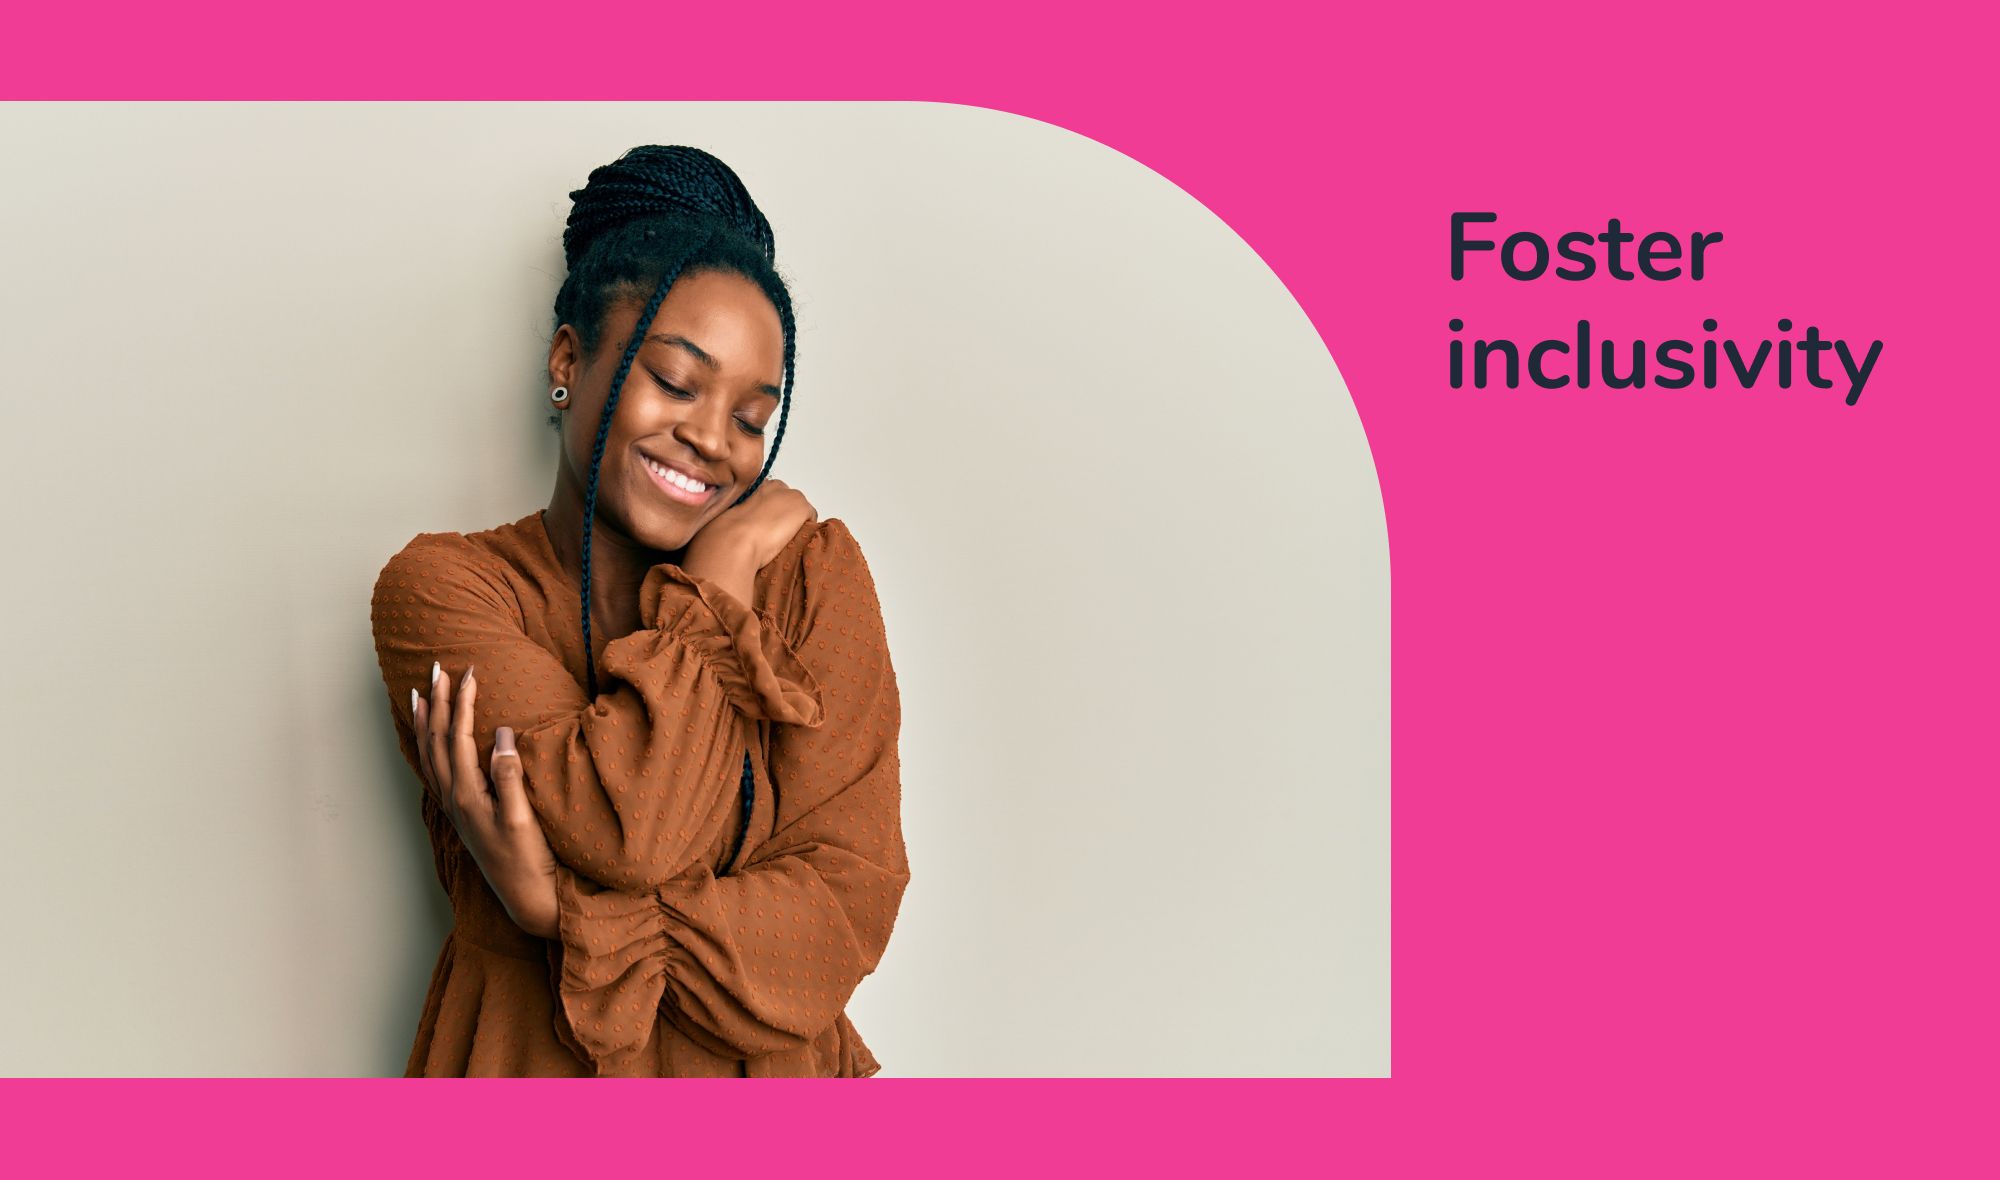 Foster an inclusive workplace culture